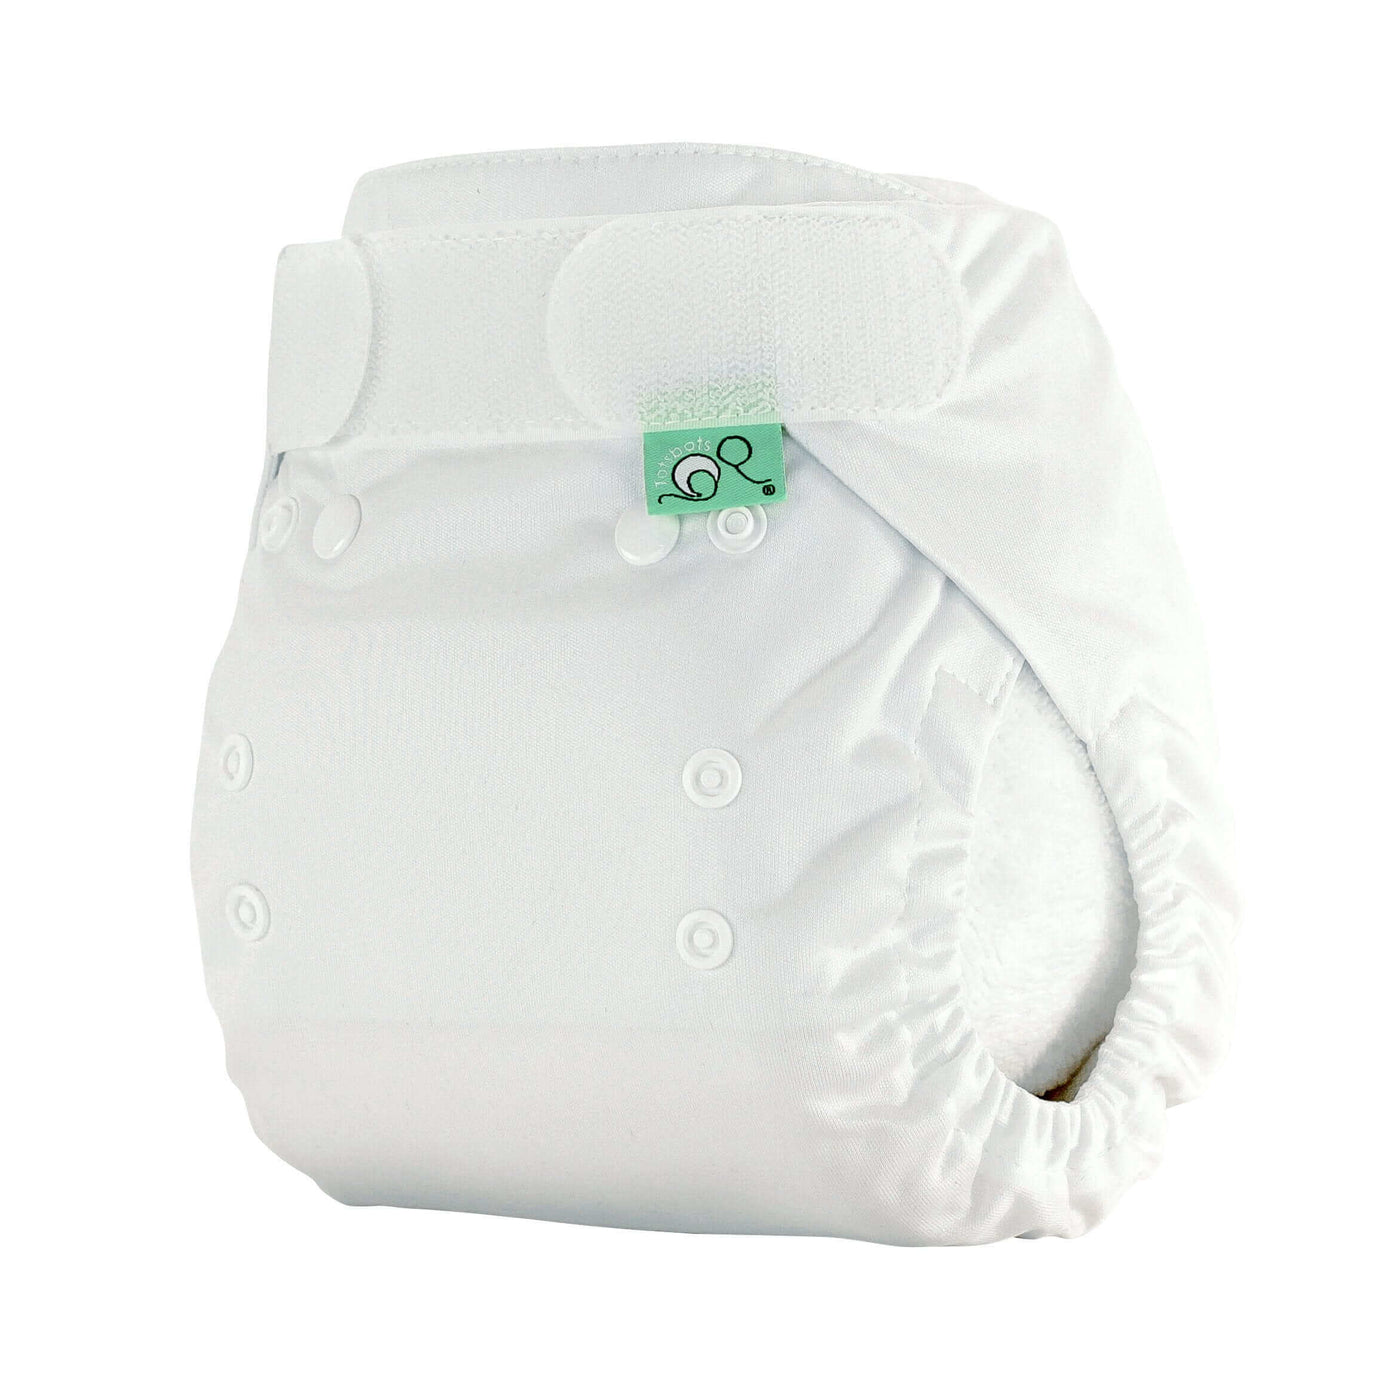 Tots Bots Bamboozle Nappy Wrap Colour: White Size: Size 1 (6-18lbs) reusable nappies Earthlets